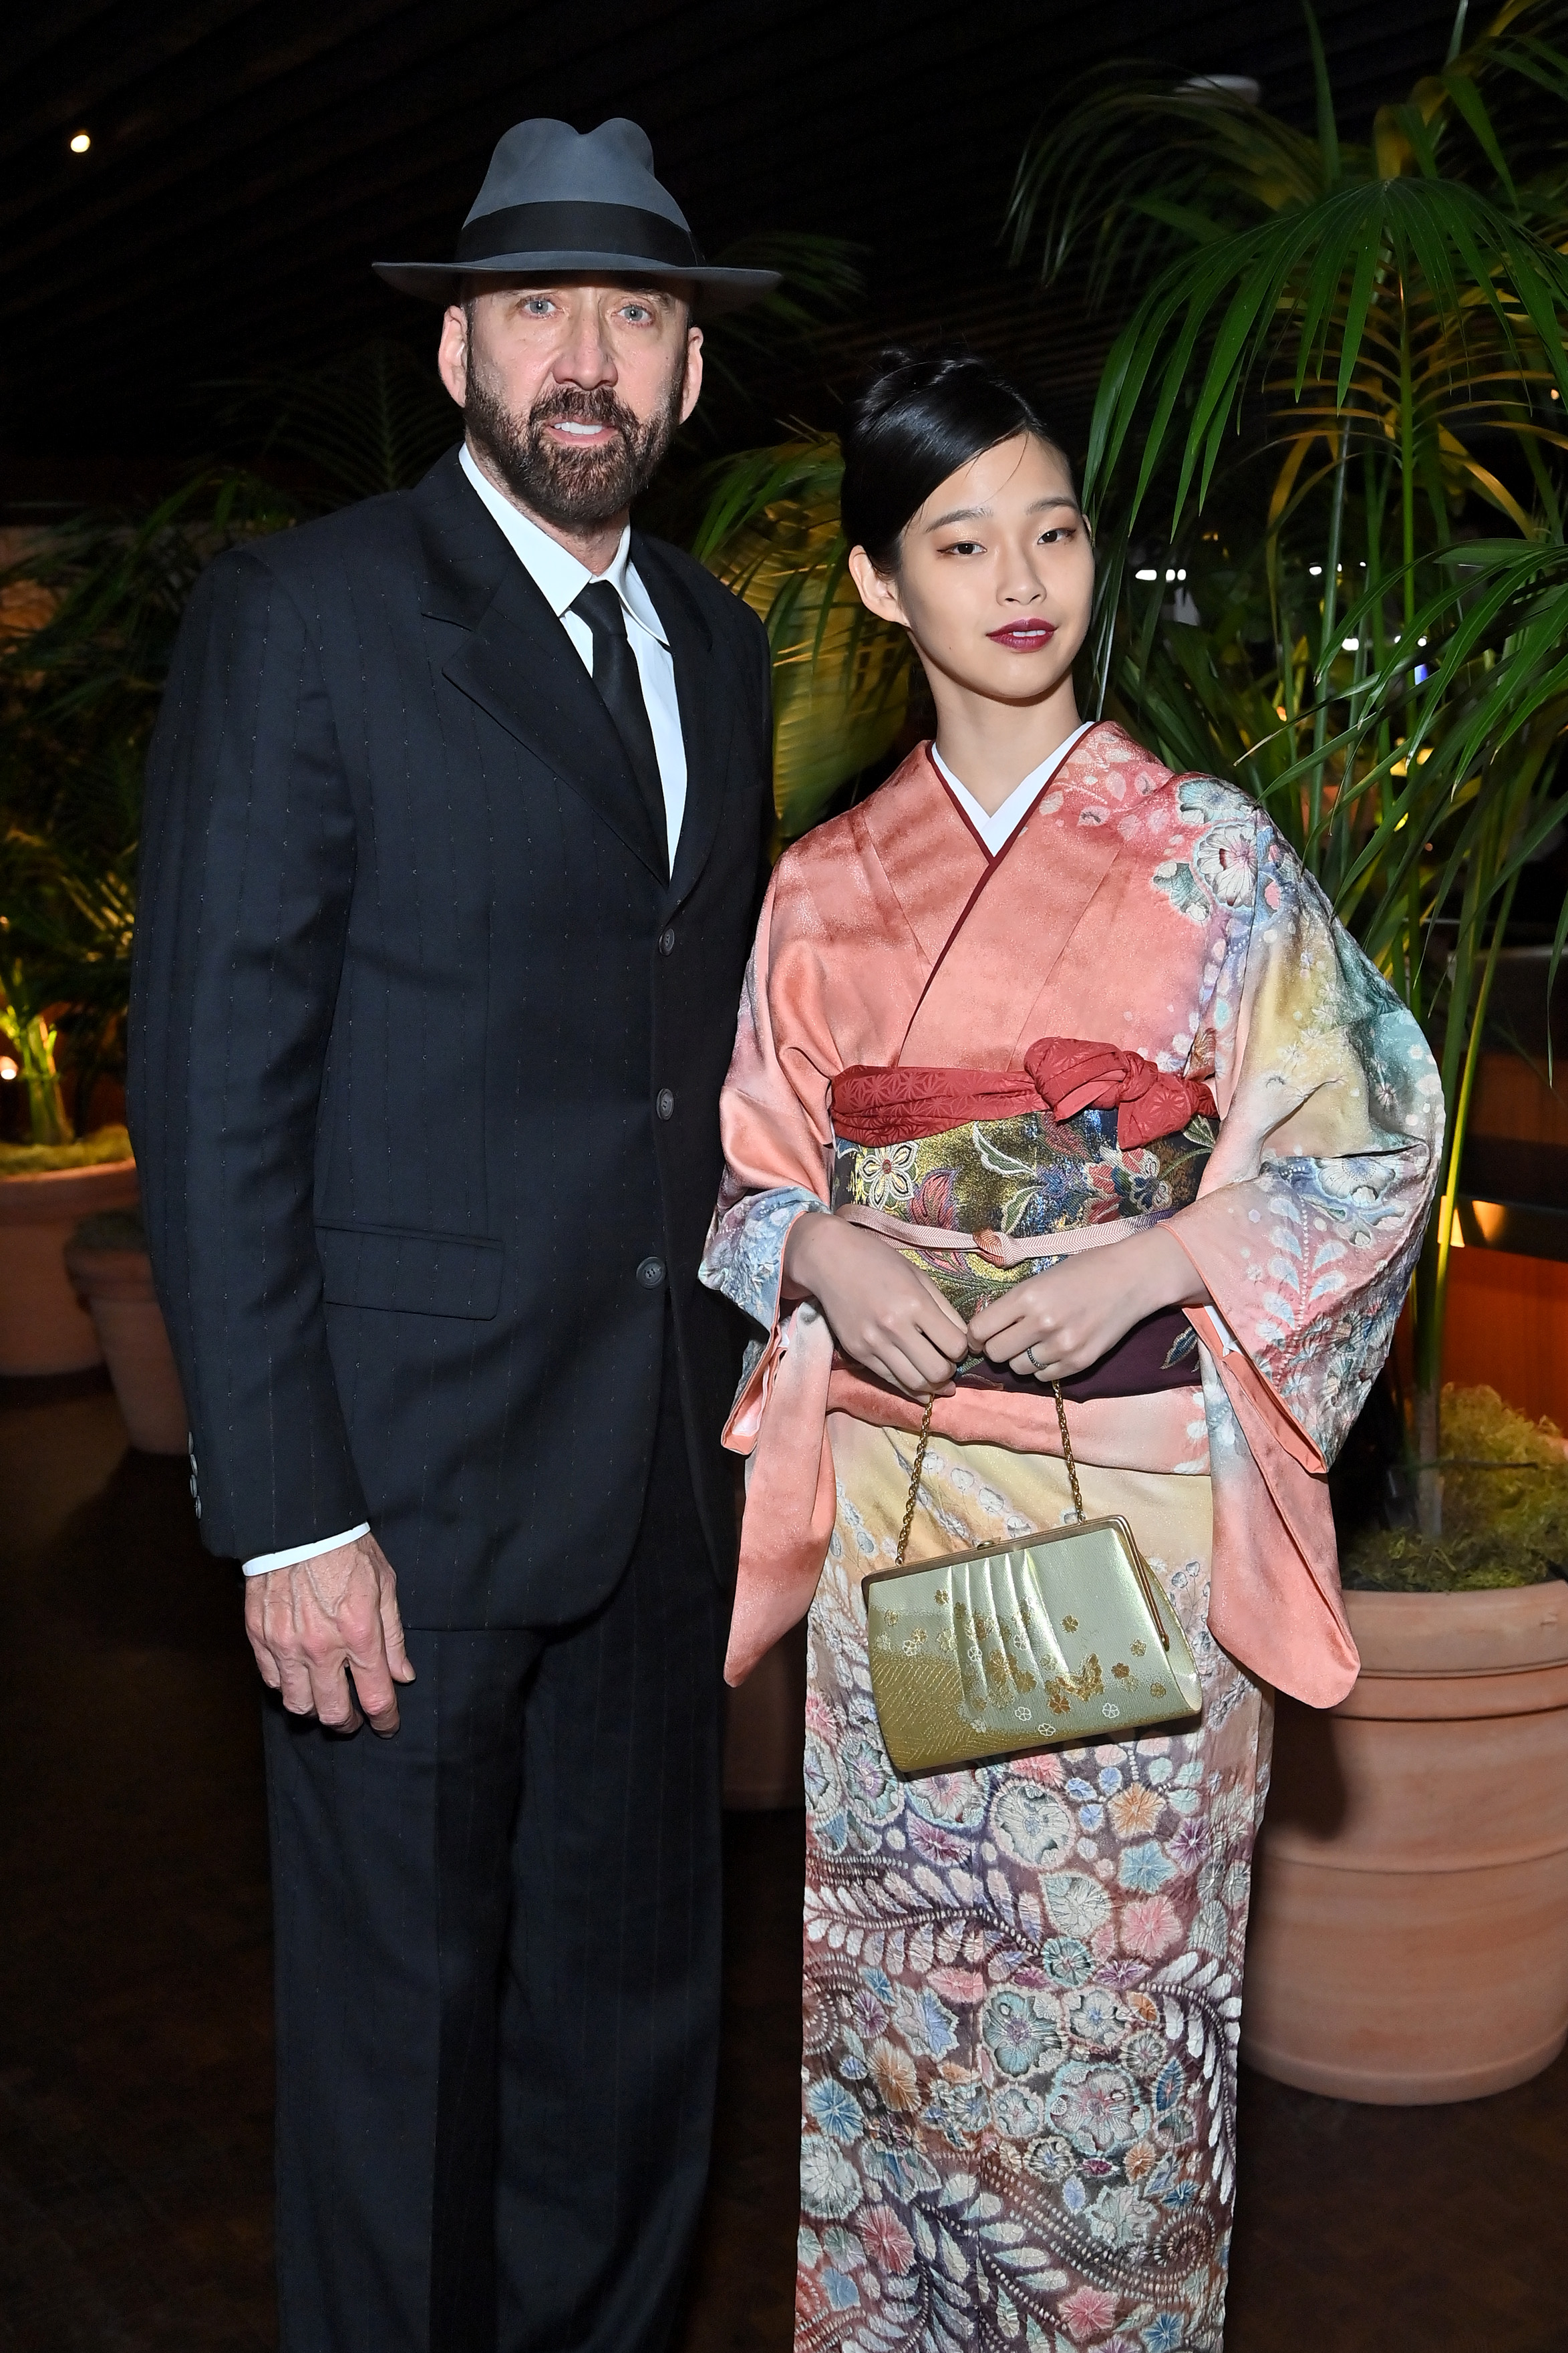 Nicolas Cage and Riko Shibata in West Hollywood, California on November 18, 2021 | Source: Getty Images